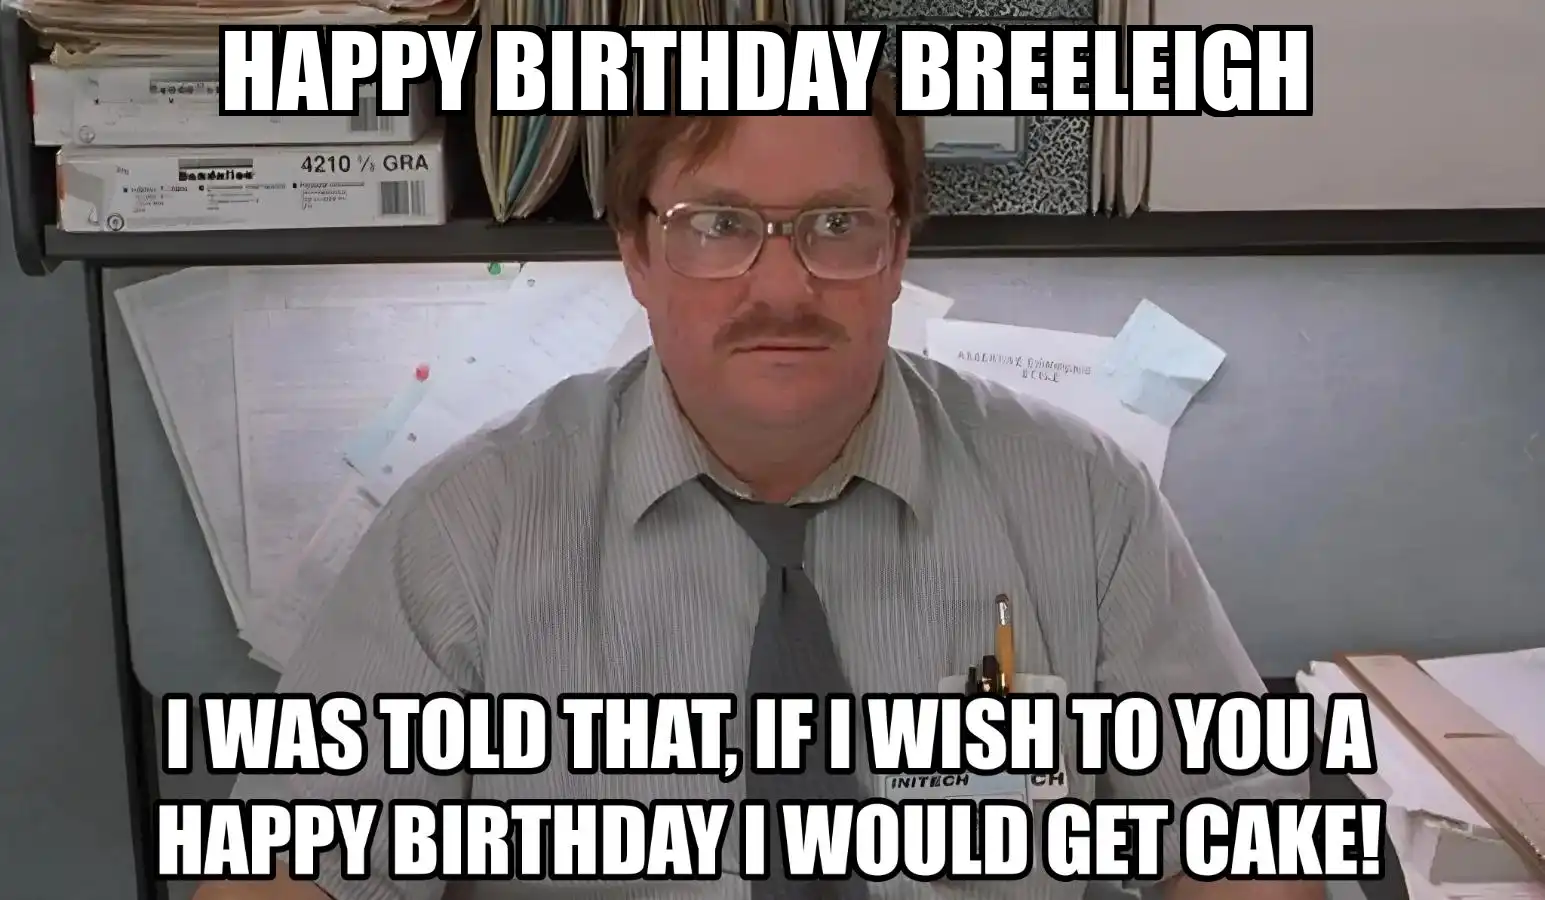 Happy Birthday Breeleigh I Would Get A Cake Meme